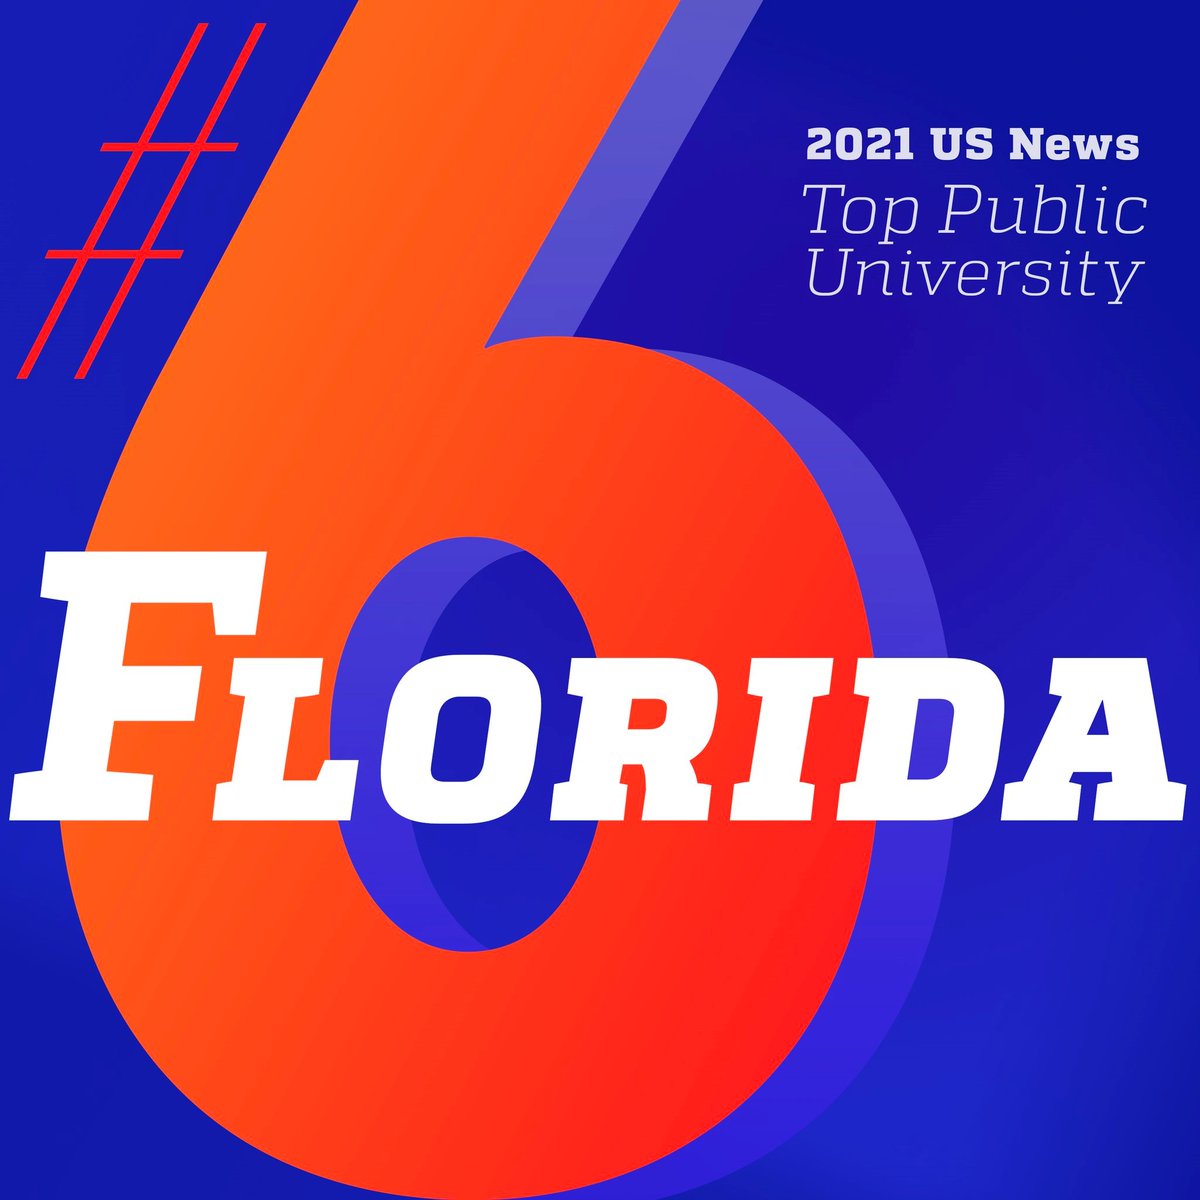 Proud Gator Alert! @UF is on the move again as they continue #UFRising in the @usnews Rankings as the #6  Public University in the Country for 2021! Congrats to @PresidentFuchs and all of #GatorNation! #GoGators #ItsGreatToBeAFloridaGator